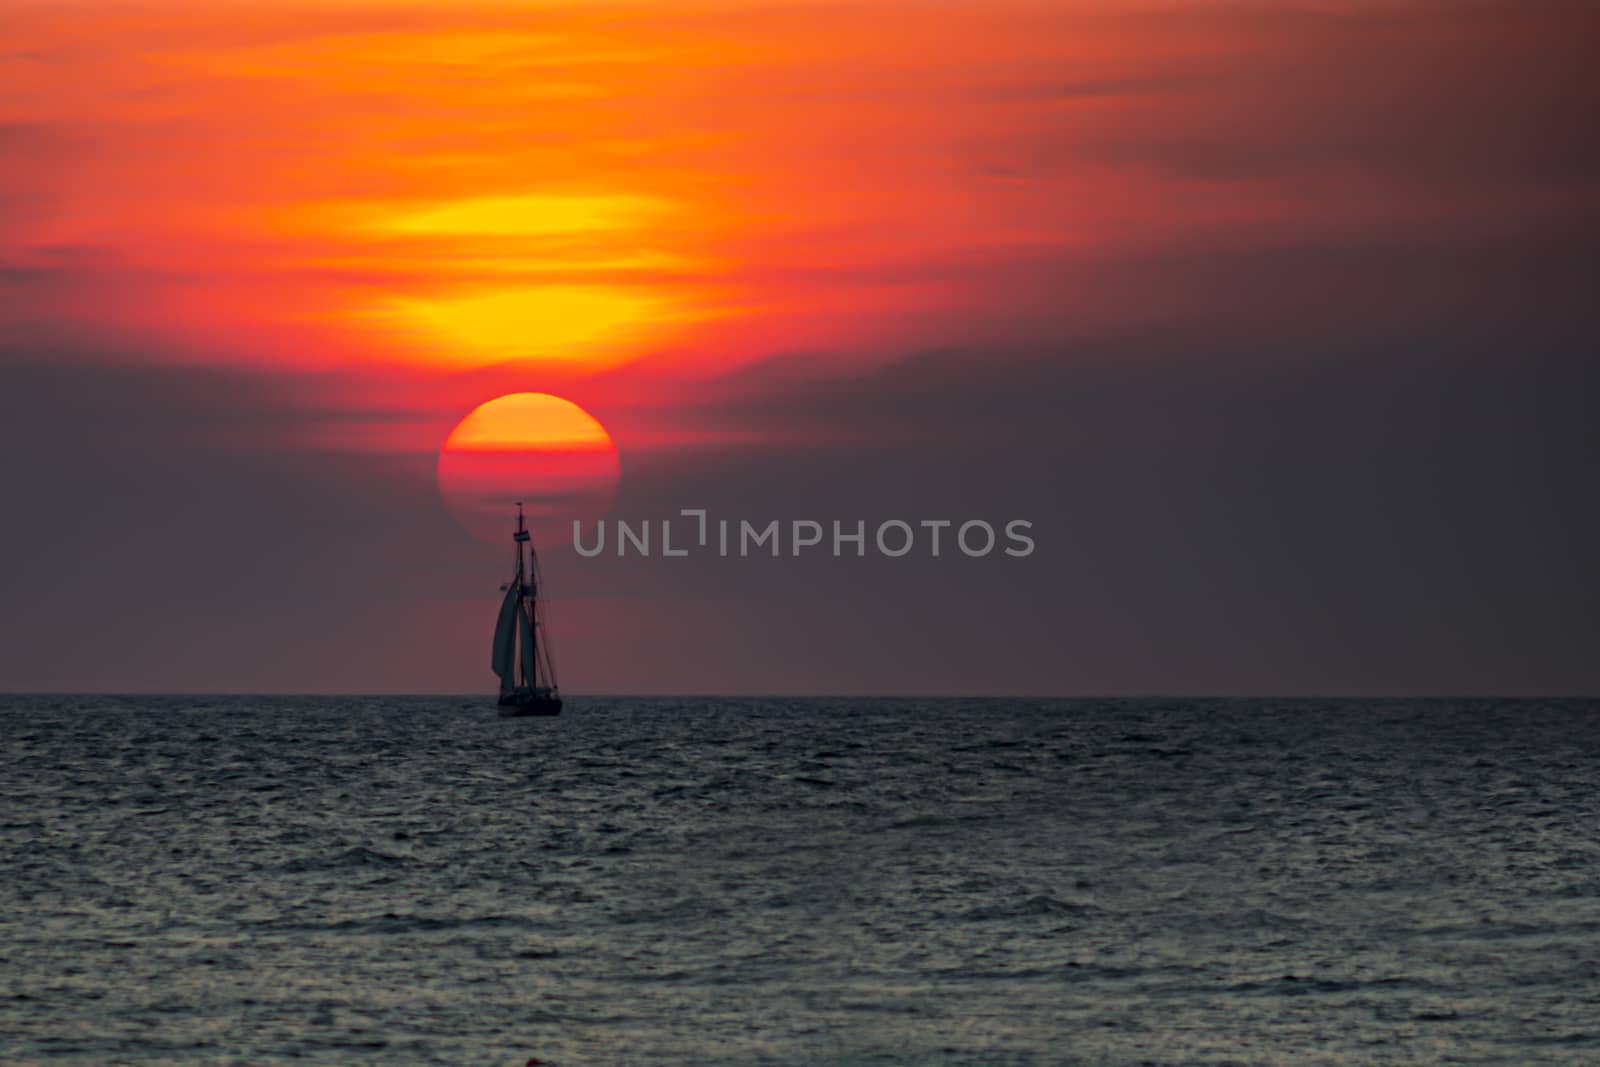 Tall ship, vessel, sailing and preparing the enter inside the harbor of Scheveningen at the vivid sunset moment, The Hague, Netherlands by ankorlight